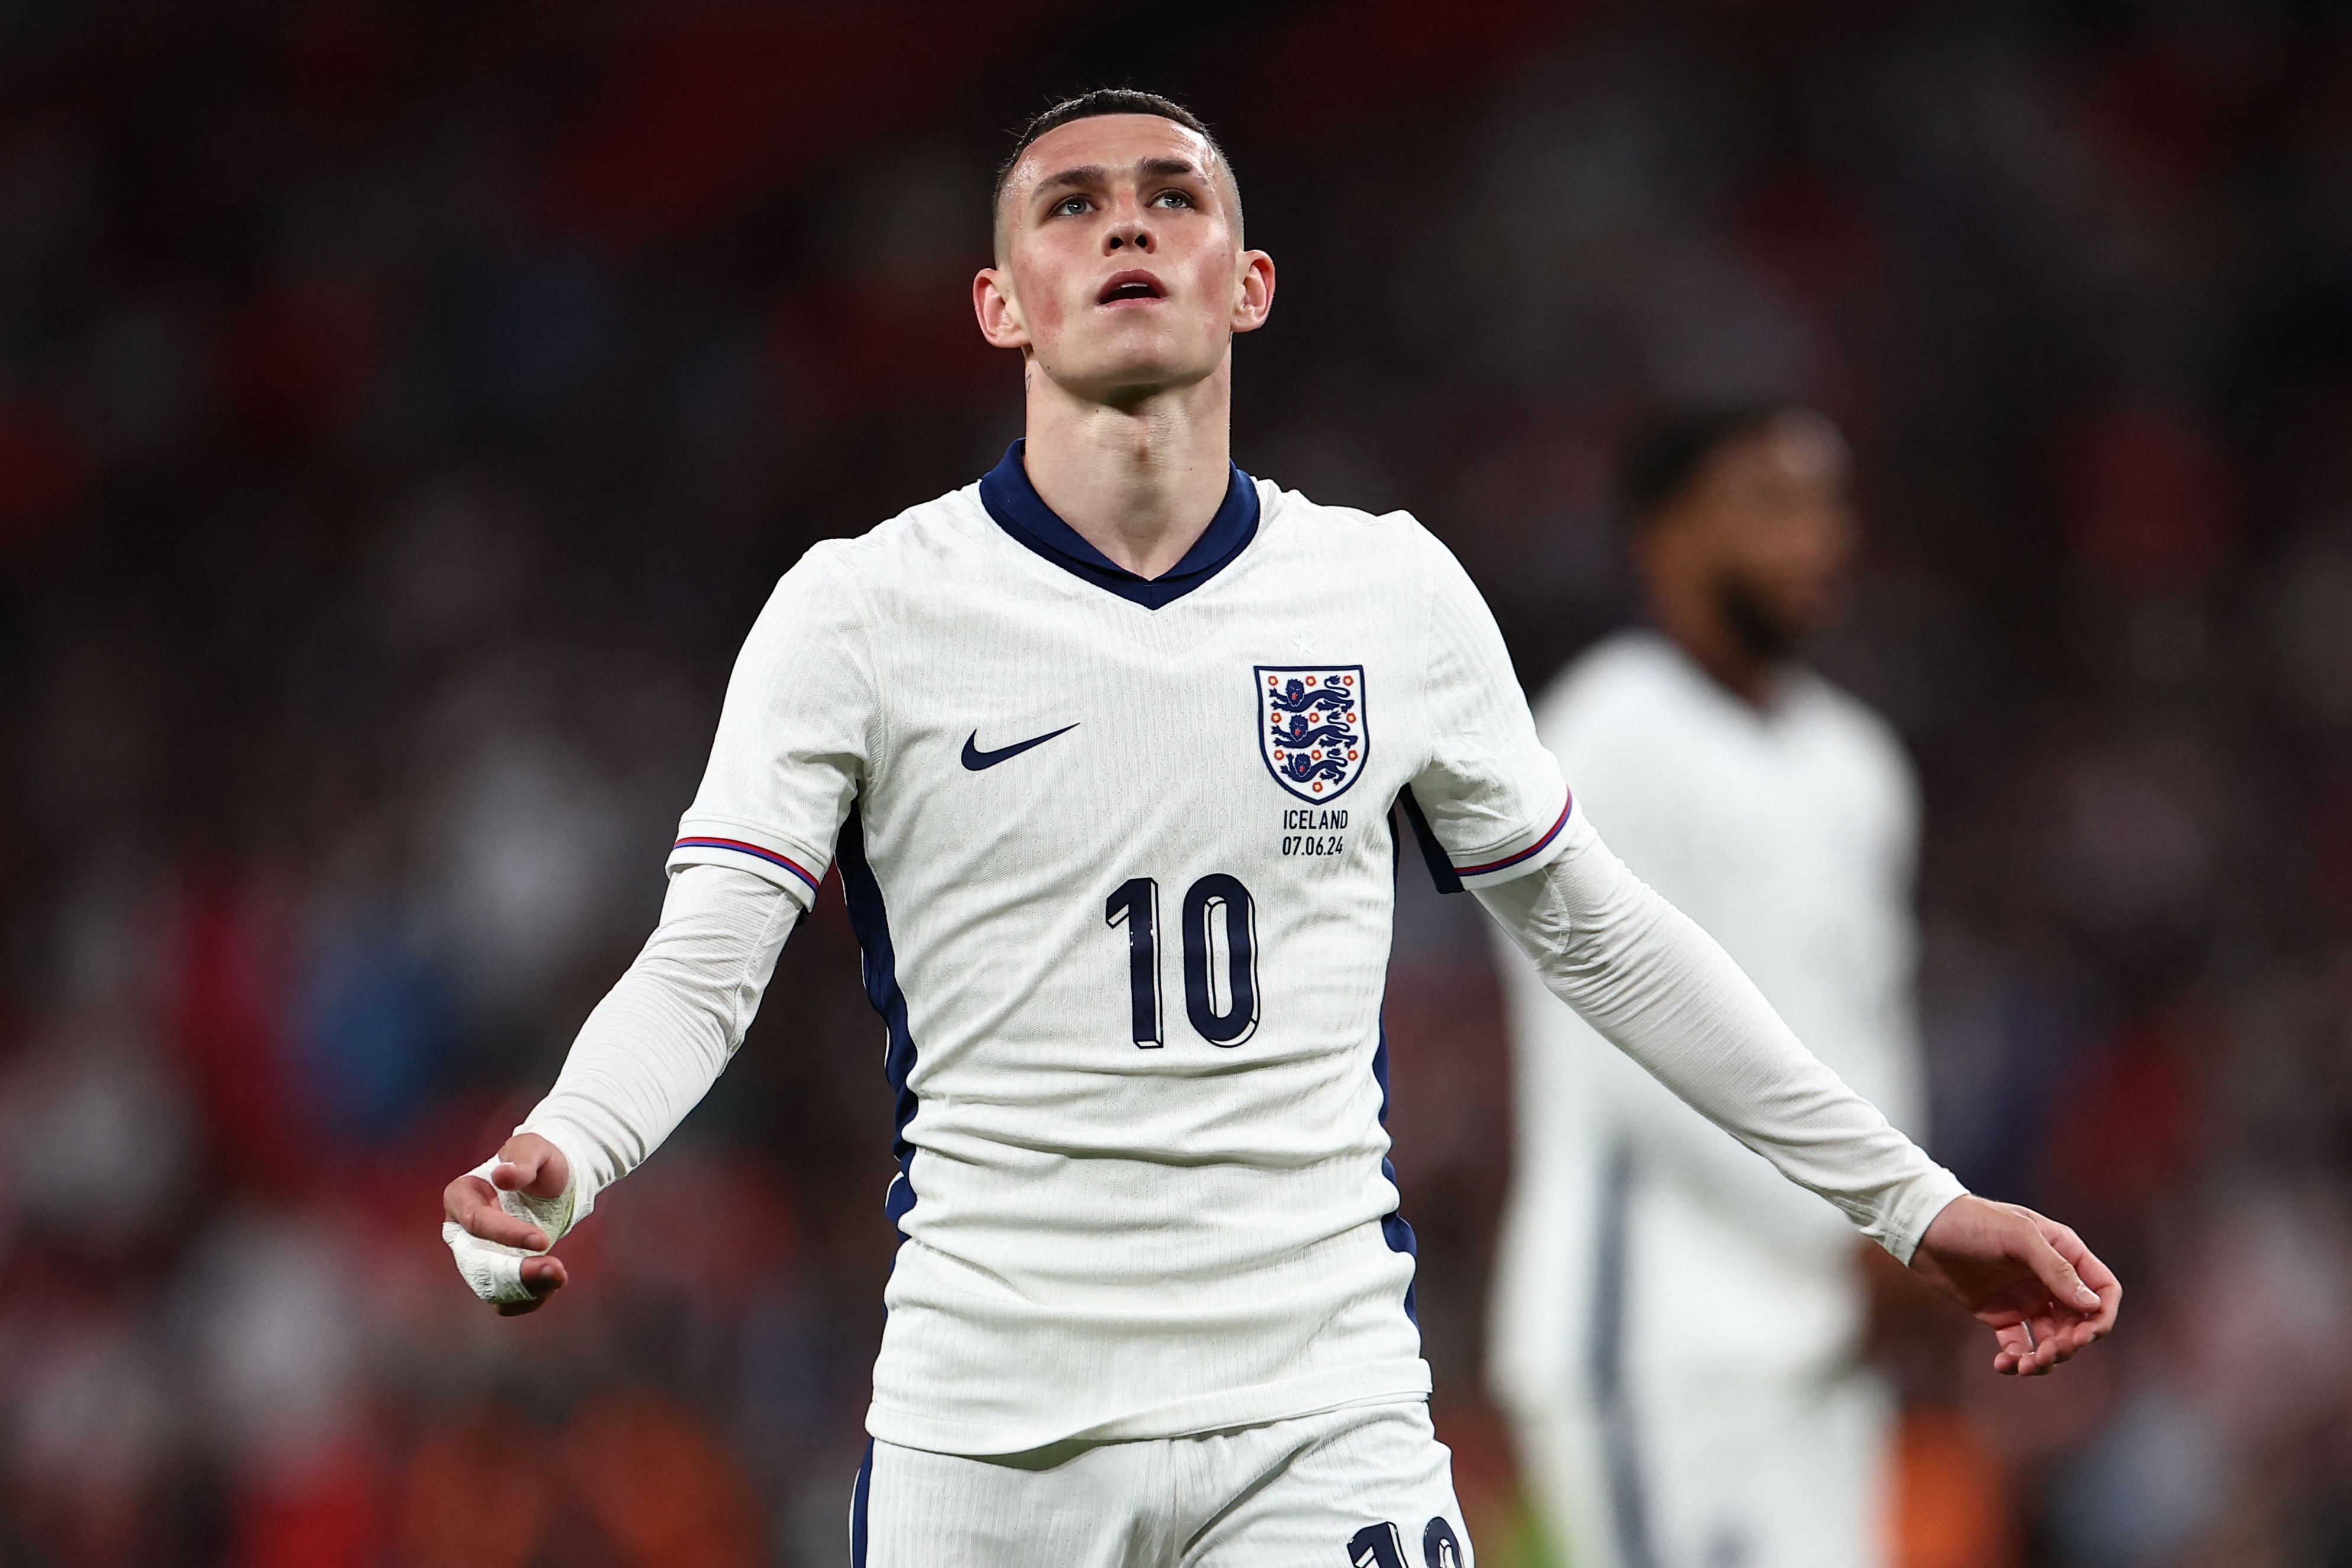 England's midfielder #10 Phil Foden reacts during the International friendly football match between England and Iceland at Wembley Stadium in London on June 7, 2024. (Photo by HENRY NICHOLLS / AFP) / NOT FOR MARKETING OR ADVERTISING USE / RESTRICTED TO EDITORIAL USE